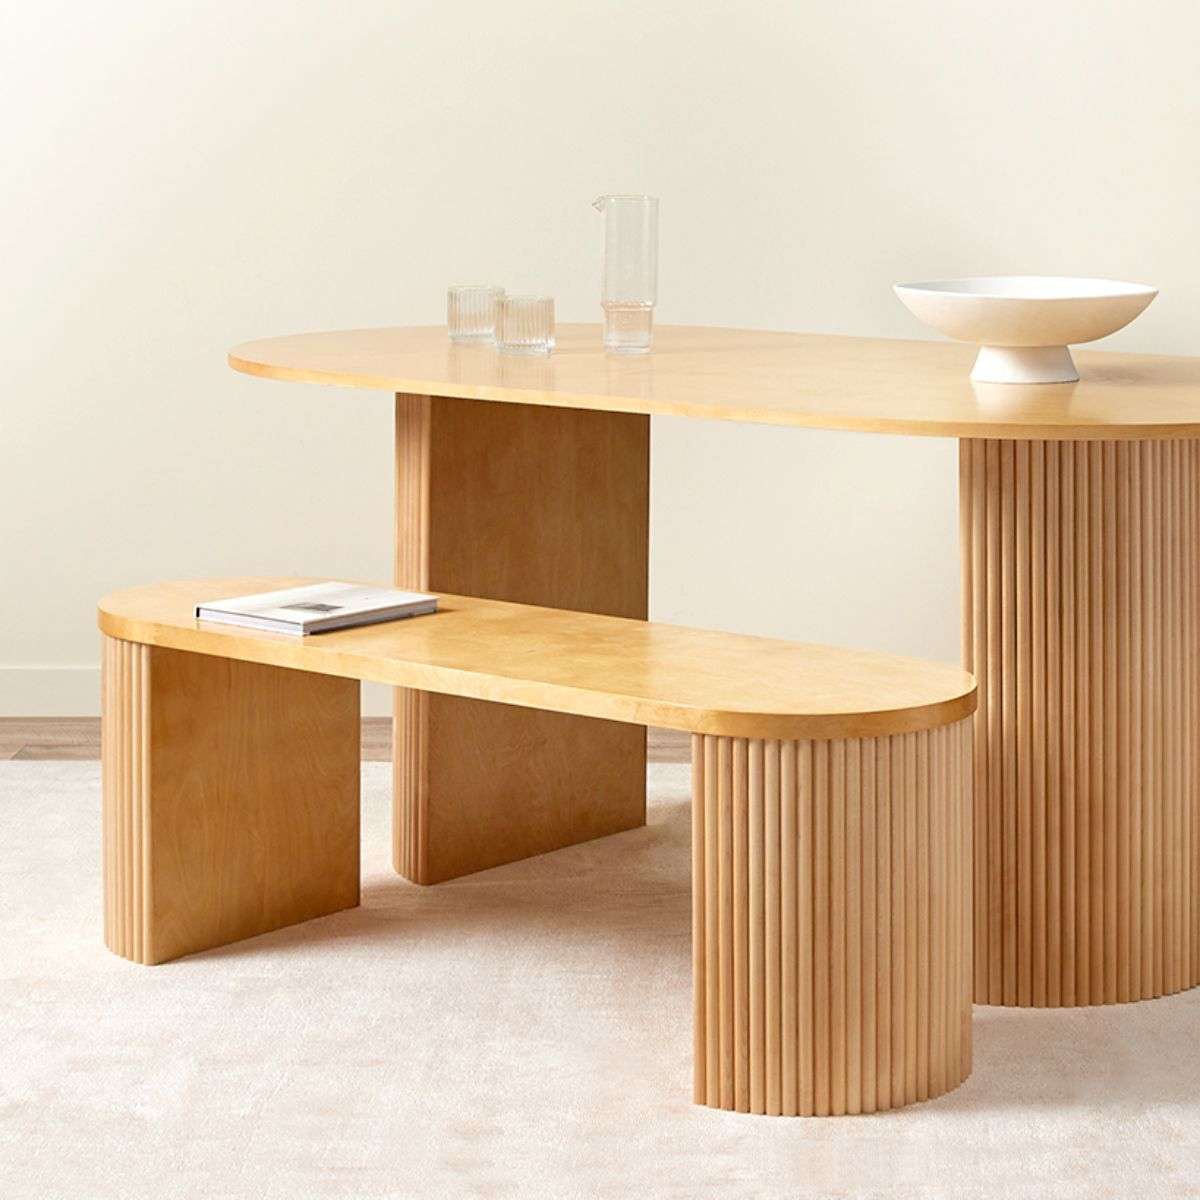 Eve 6 Seater Dining Table - Birch